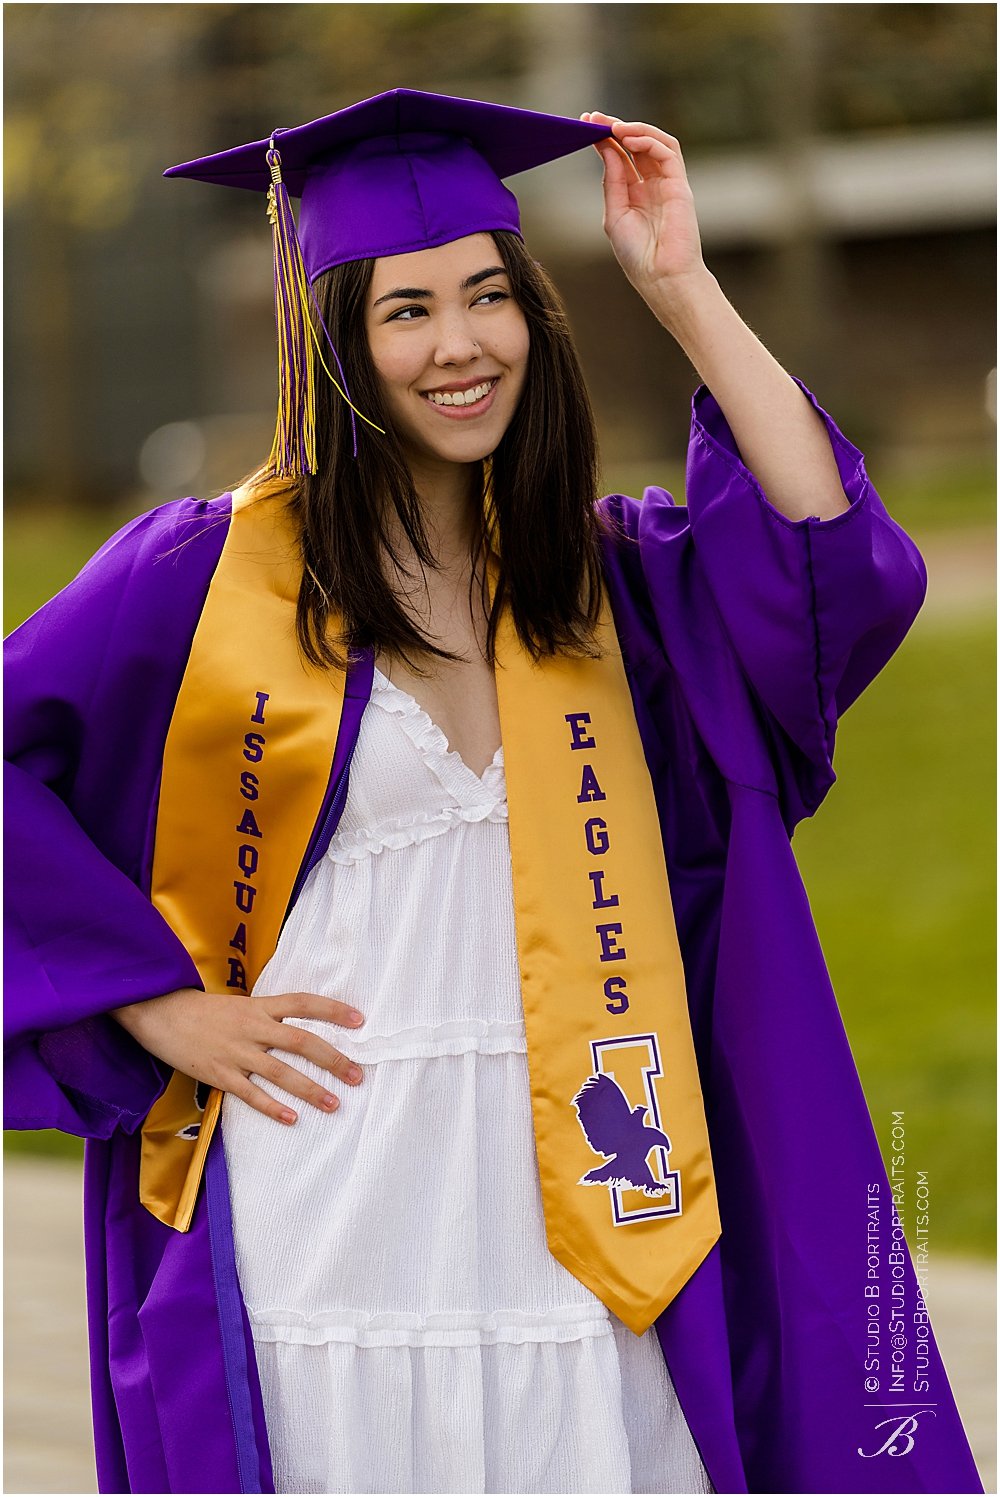 5000 Girl In Graduation Gown Stock Photos Pictures  RoyaltyFree Images   iStock